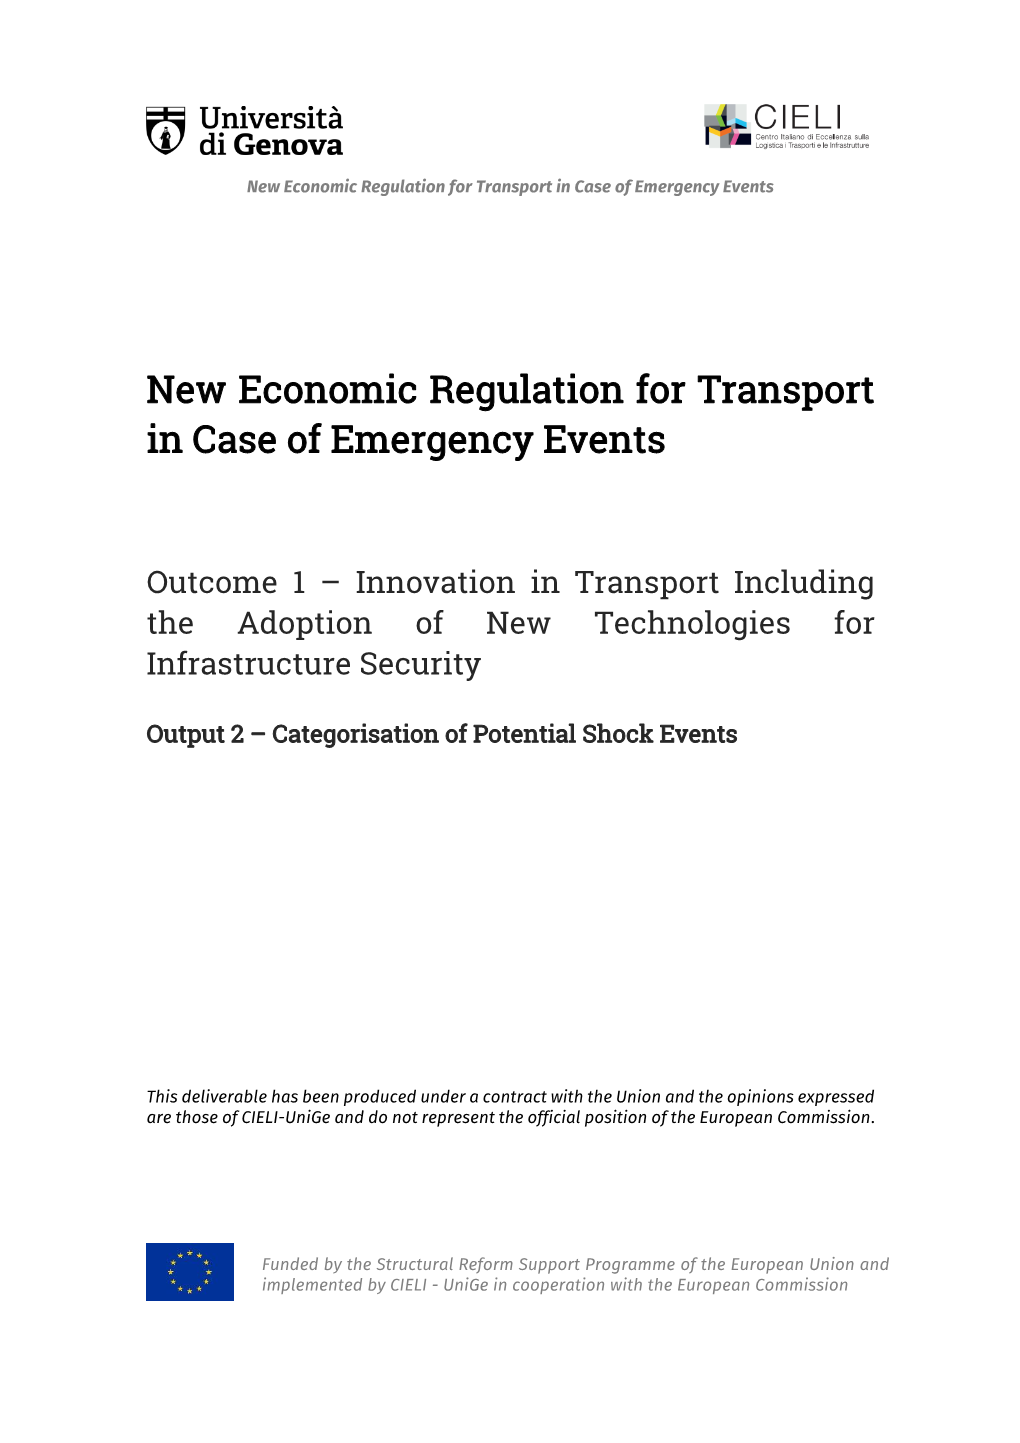 New Economic Regulation for Transport in Case of Emergency Events